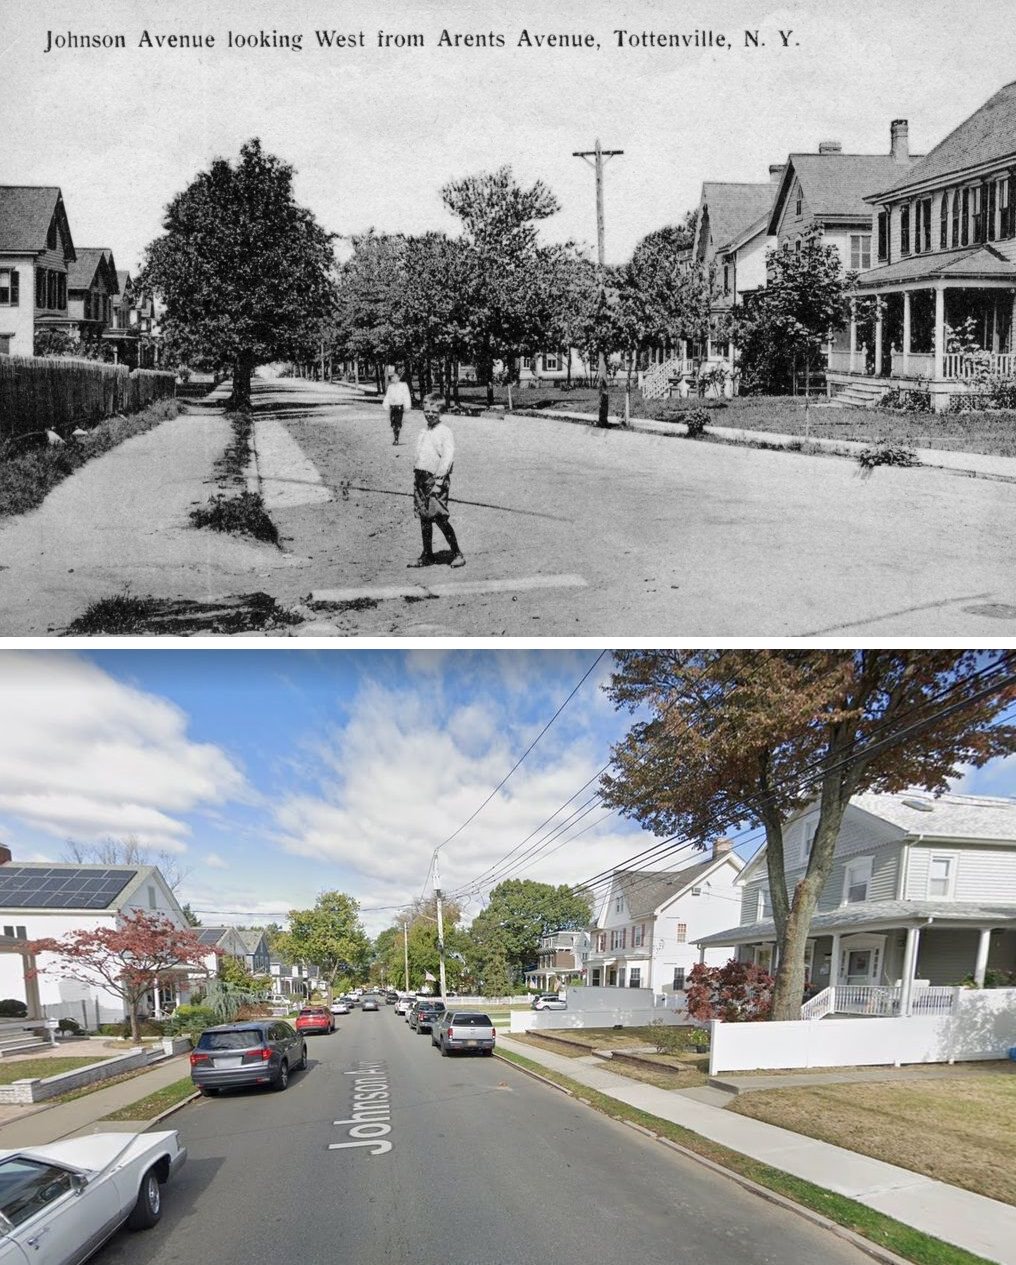 Johnson Ave. From Craig Ave. In Arthur Kill Rd. Offers A Historical View.